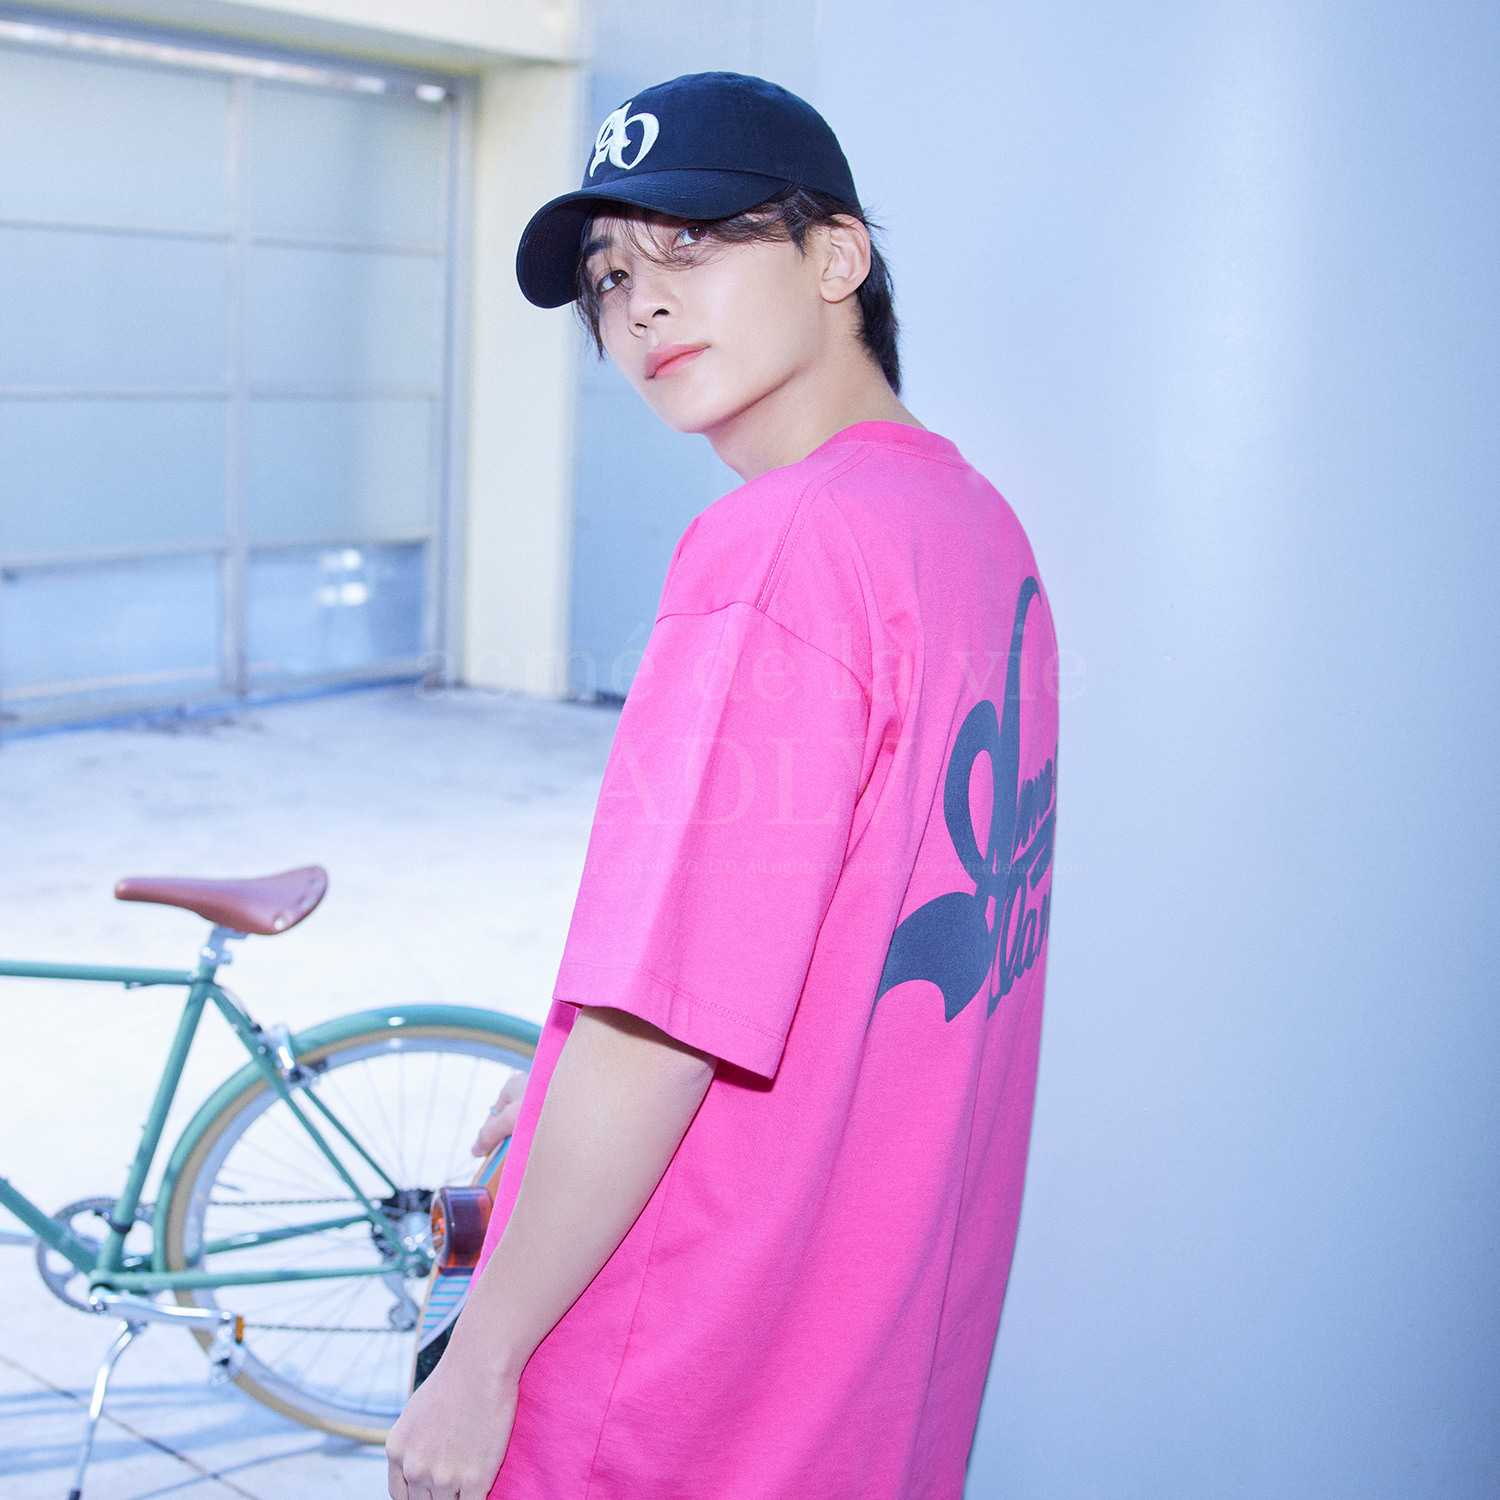 2024 SUMMER COLLECTION WITH JEONGHAN